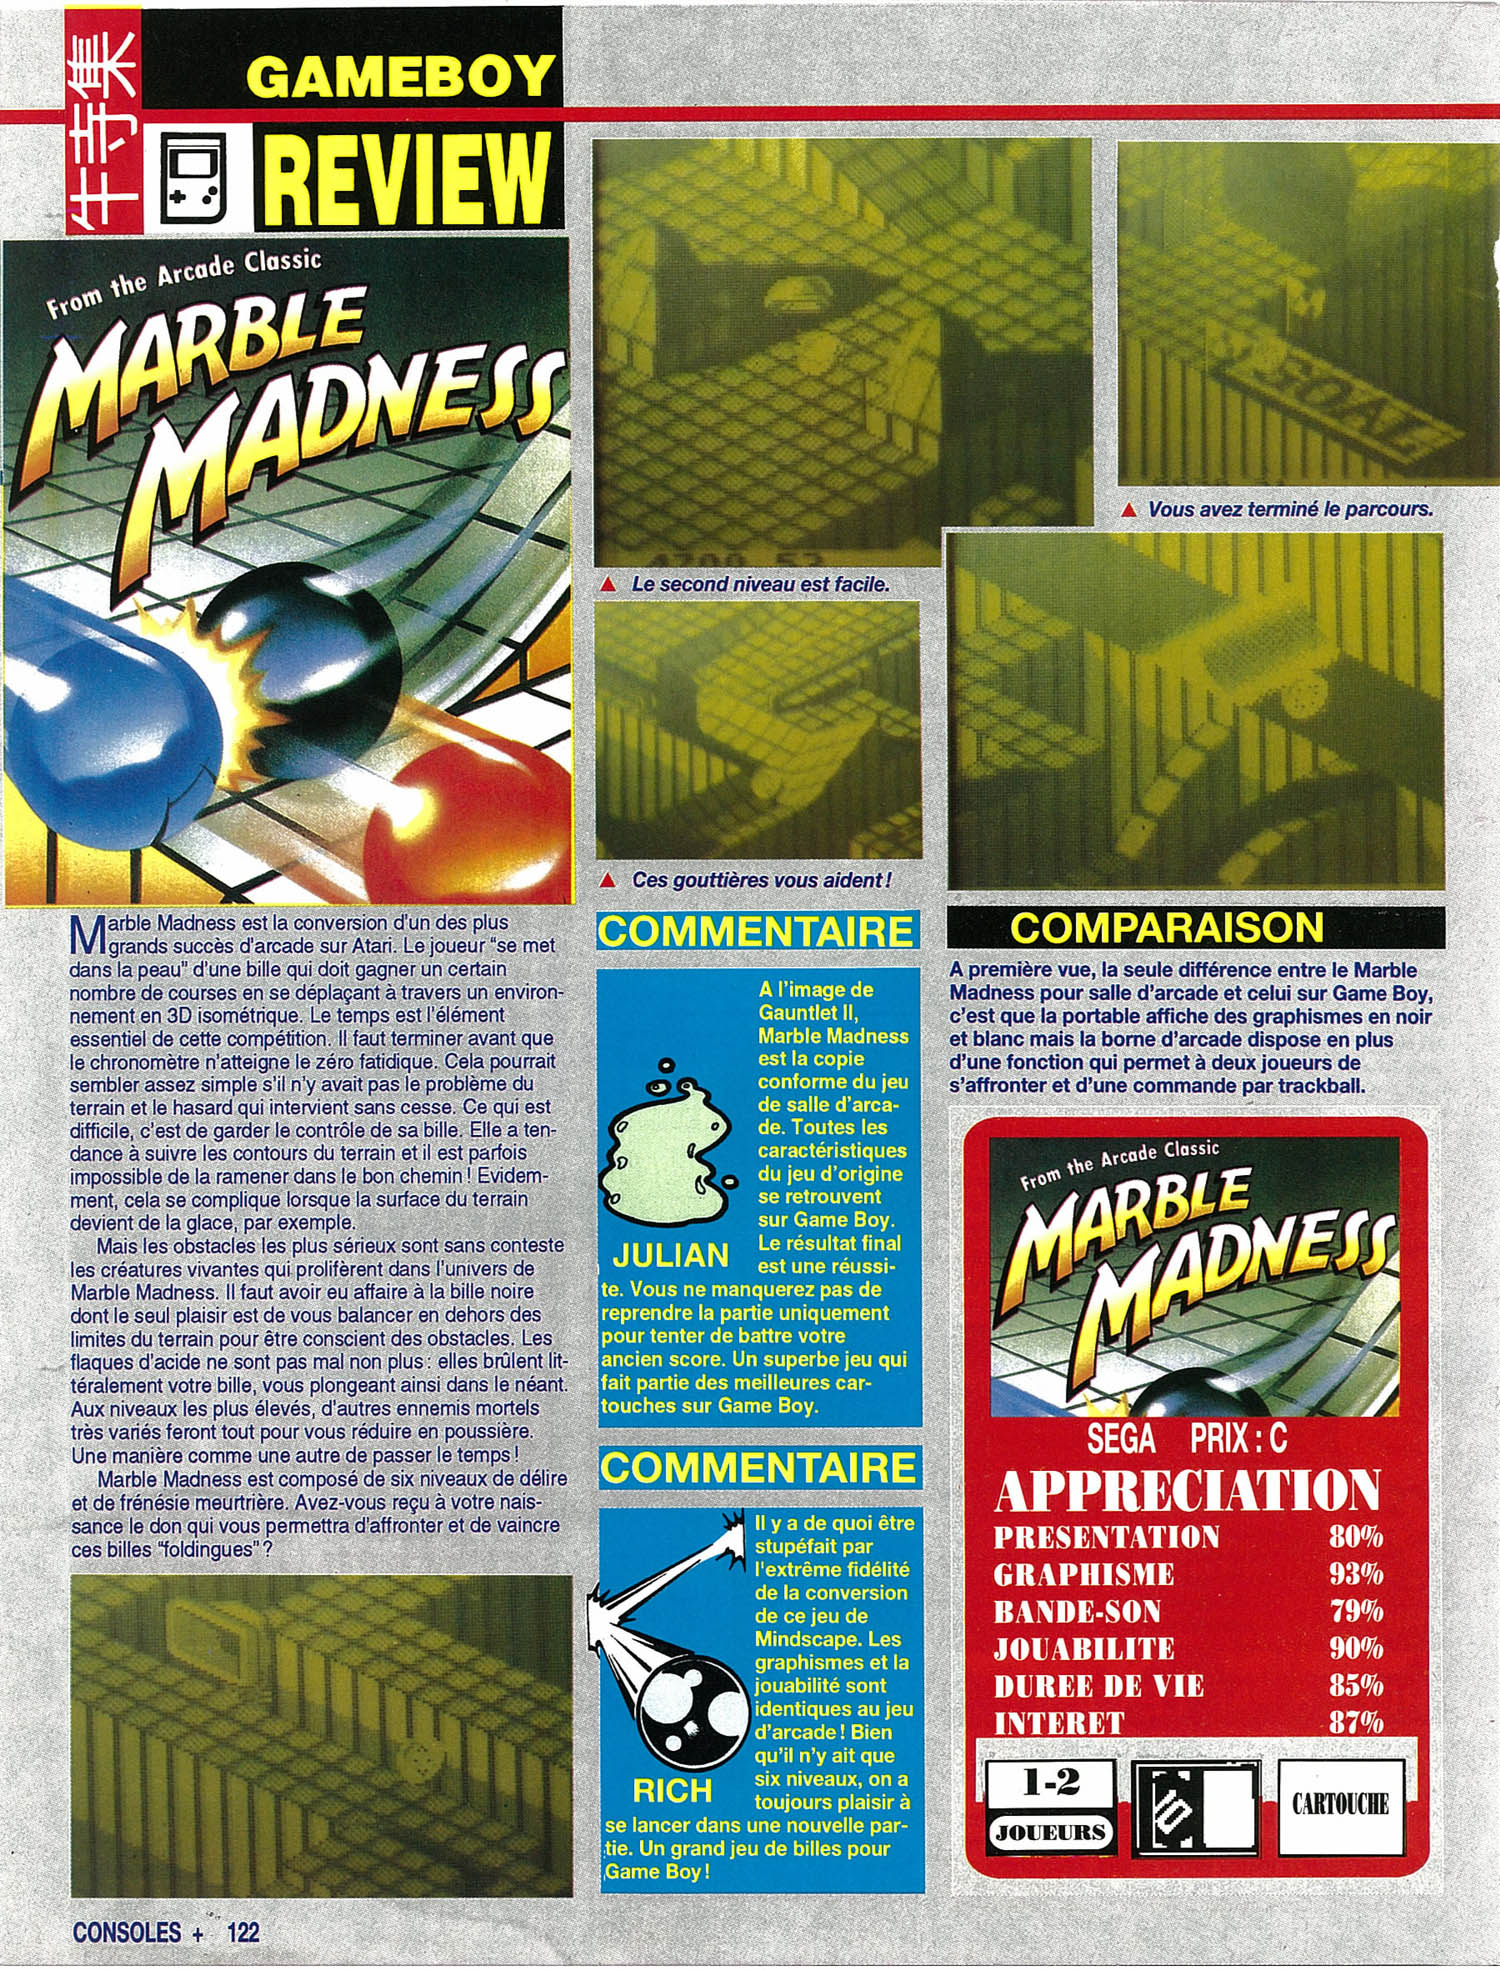 tests//995/Consoles + 007 - Page 122 (mars 1992).jpg